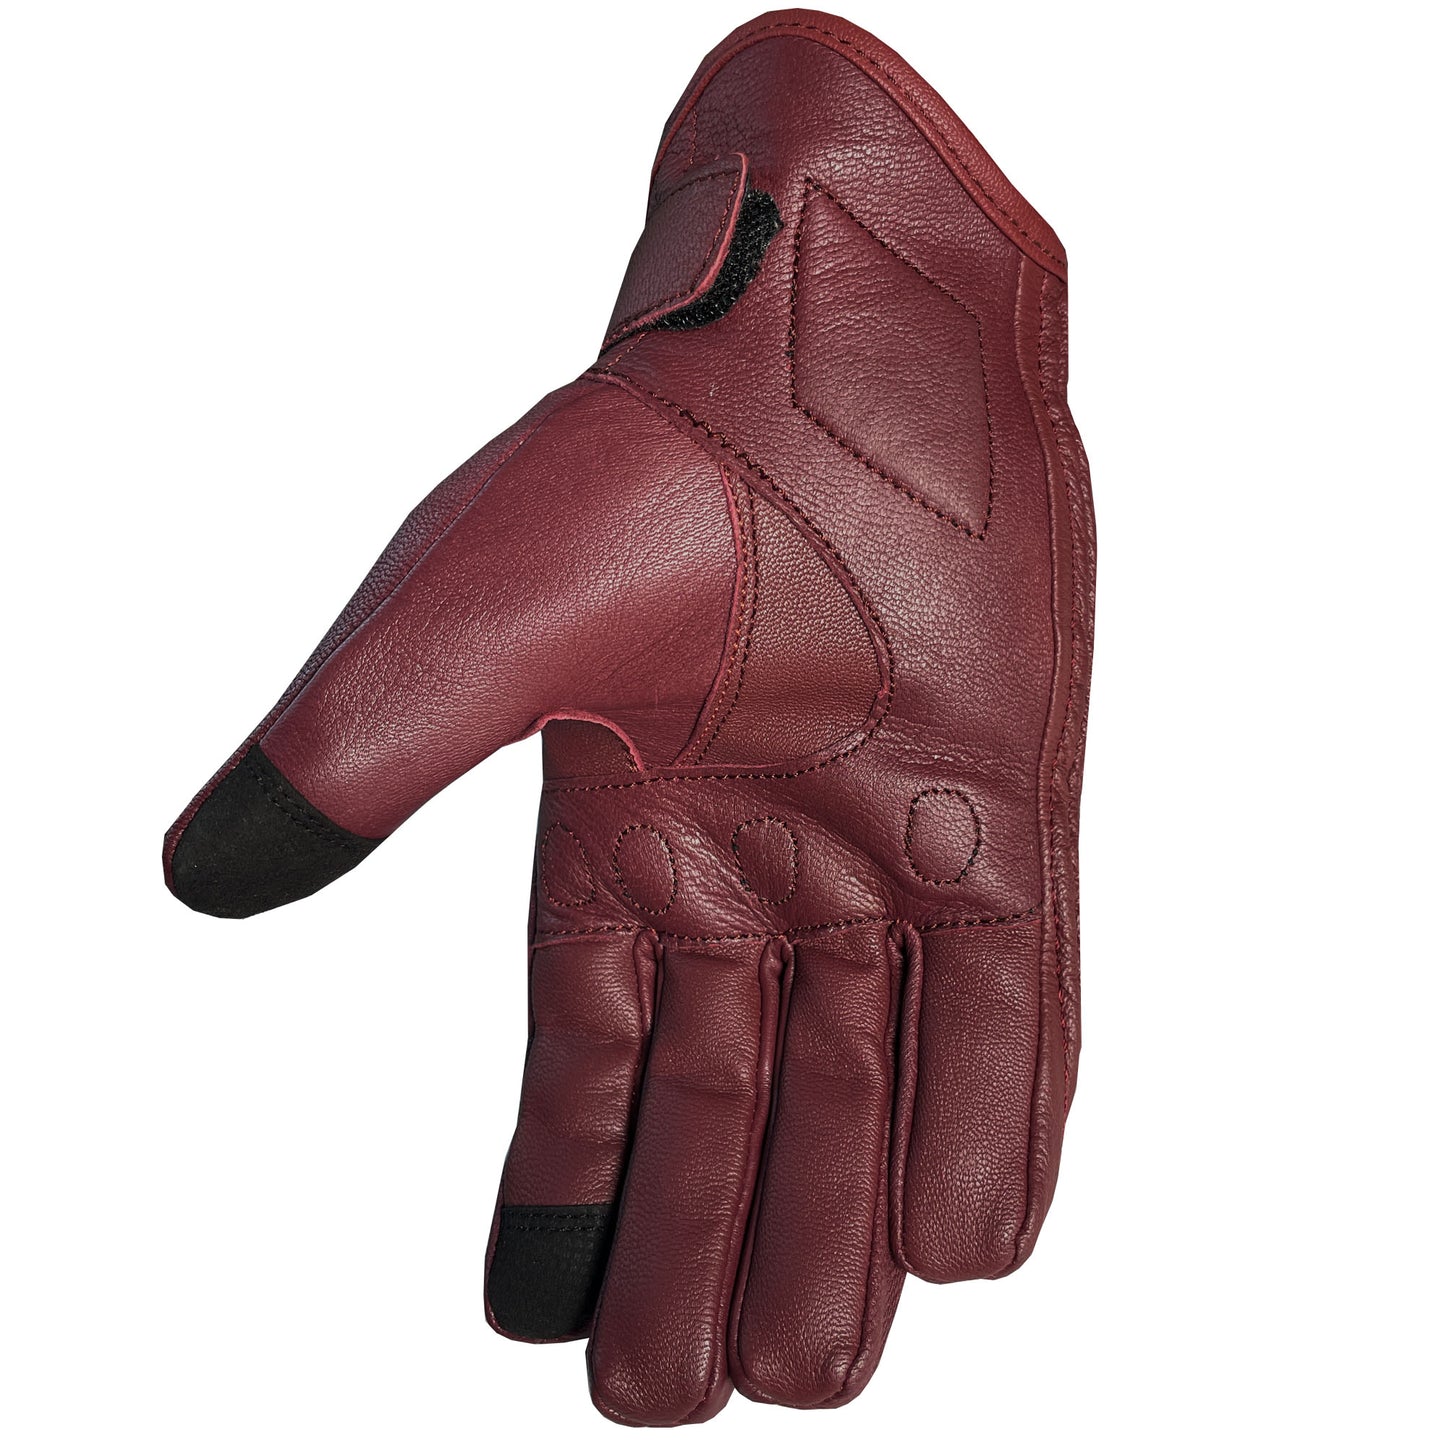 Motorcycle Bicycle Riding Racing Bike Protective Armor Gel Leather Gloves OxBlood